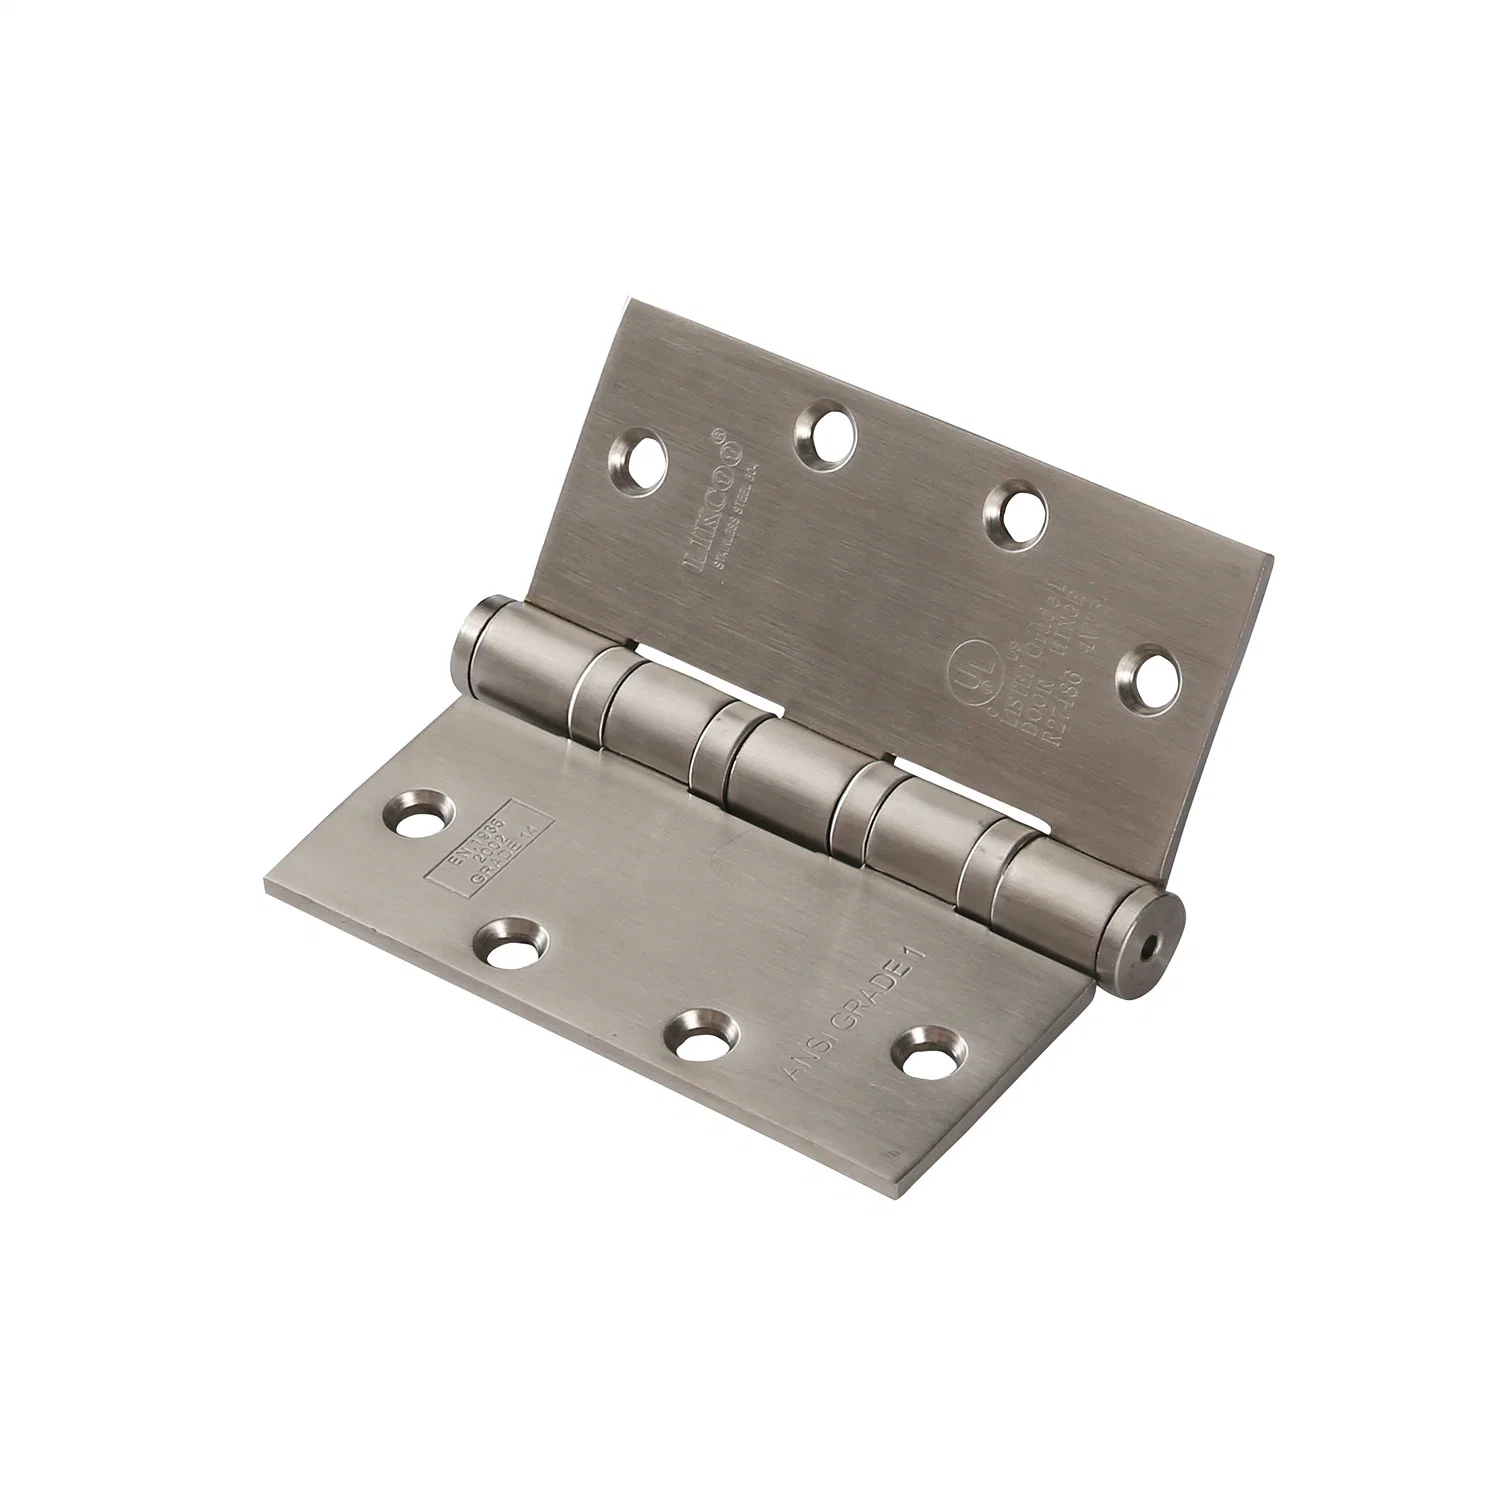 Stainless Steel 304 Material ANSI Fire Rated Door Hinge UL Listed Door Hardware